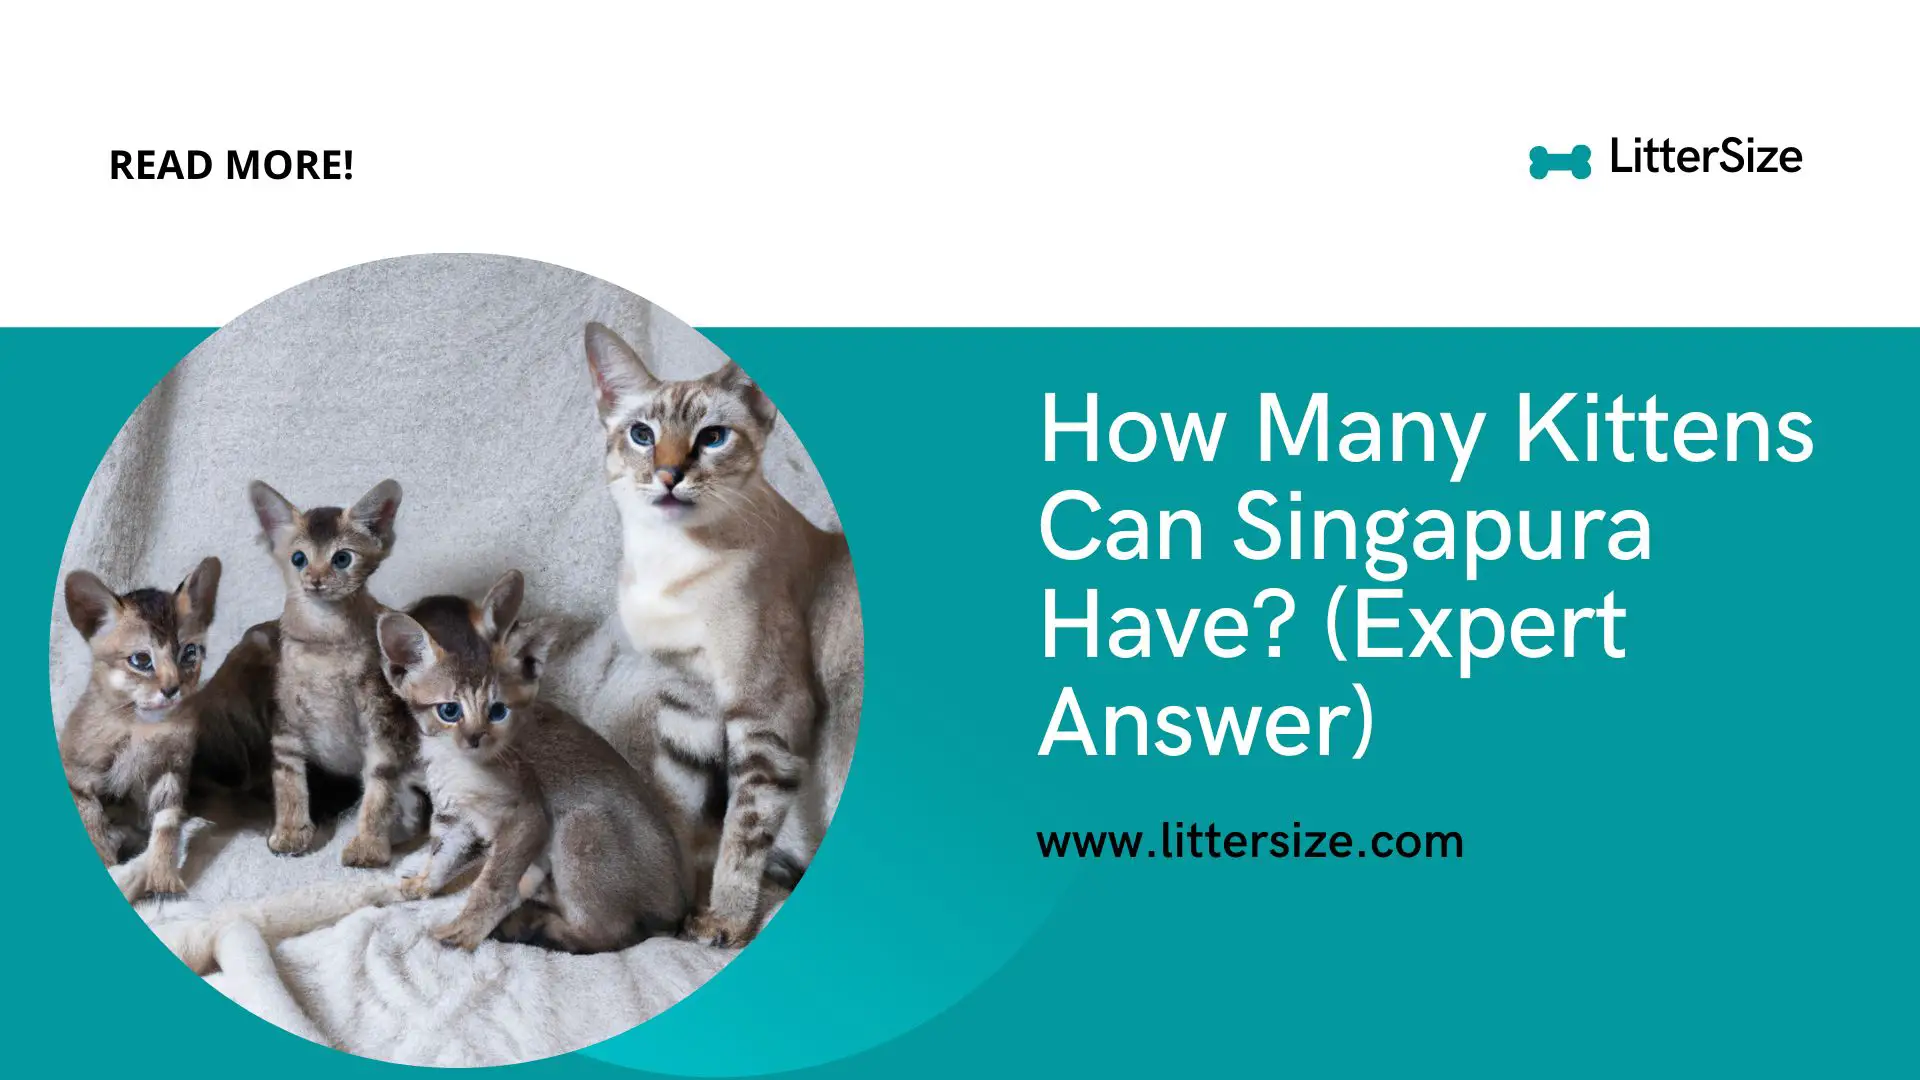 How Many Kittens Can Singapura Have? (Expert Answer)